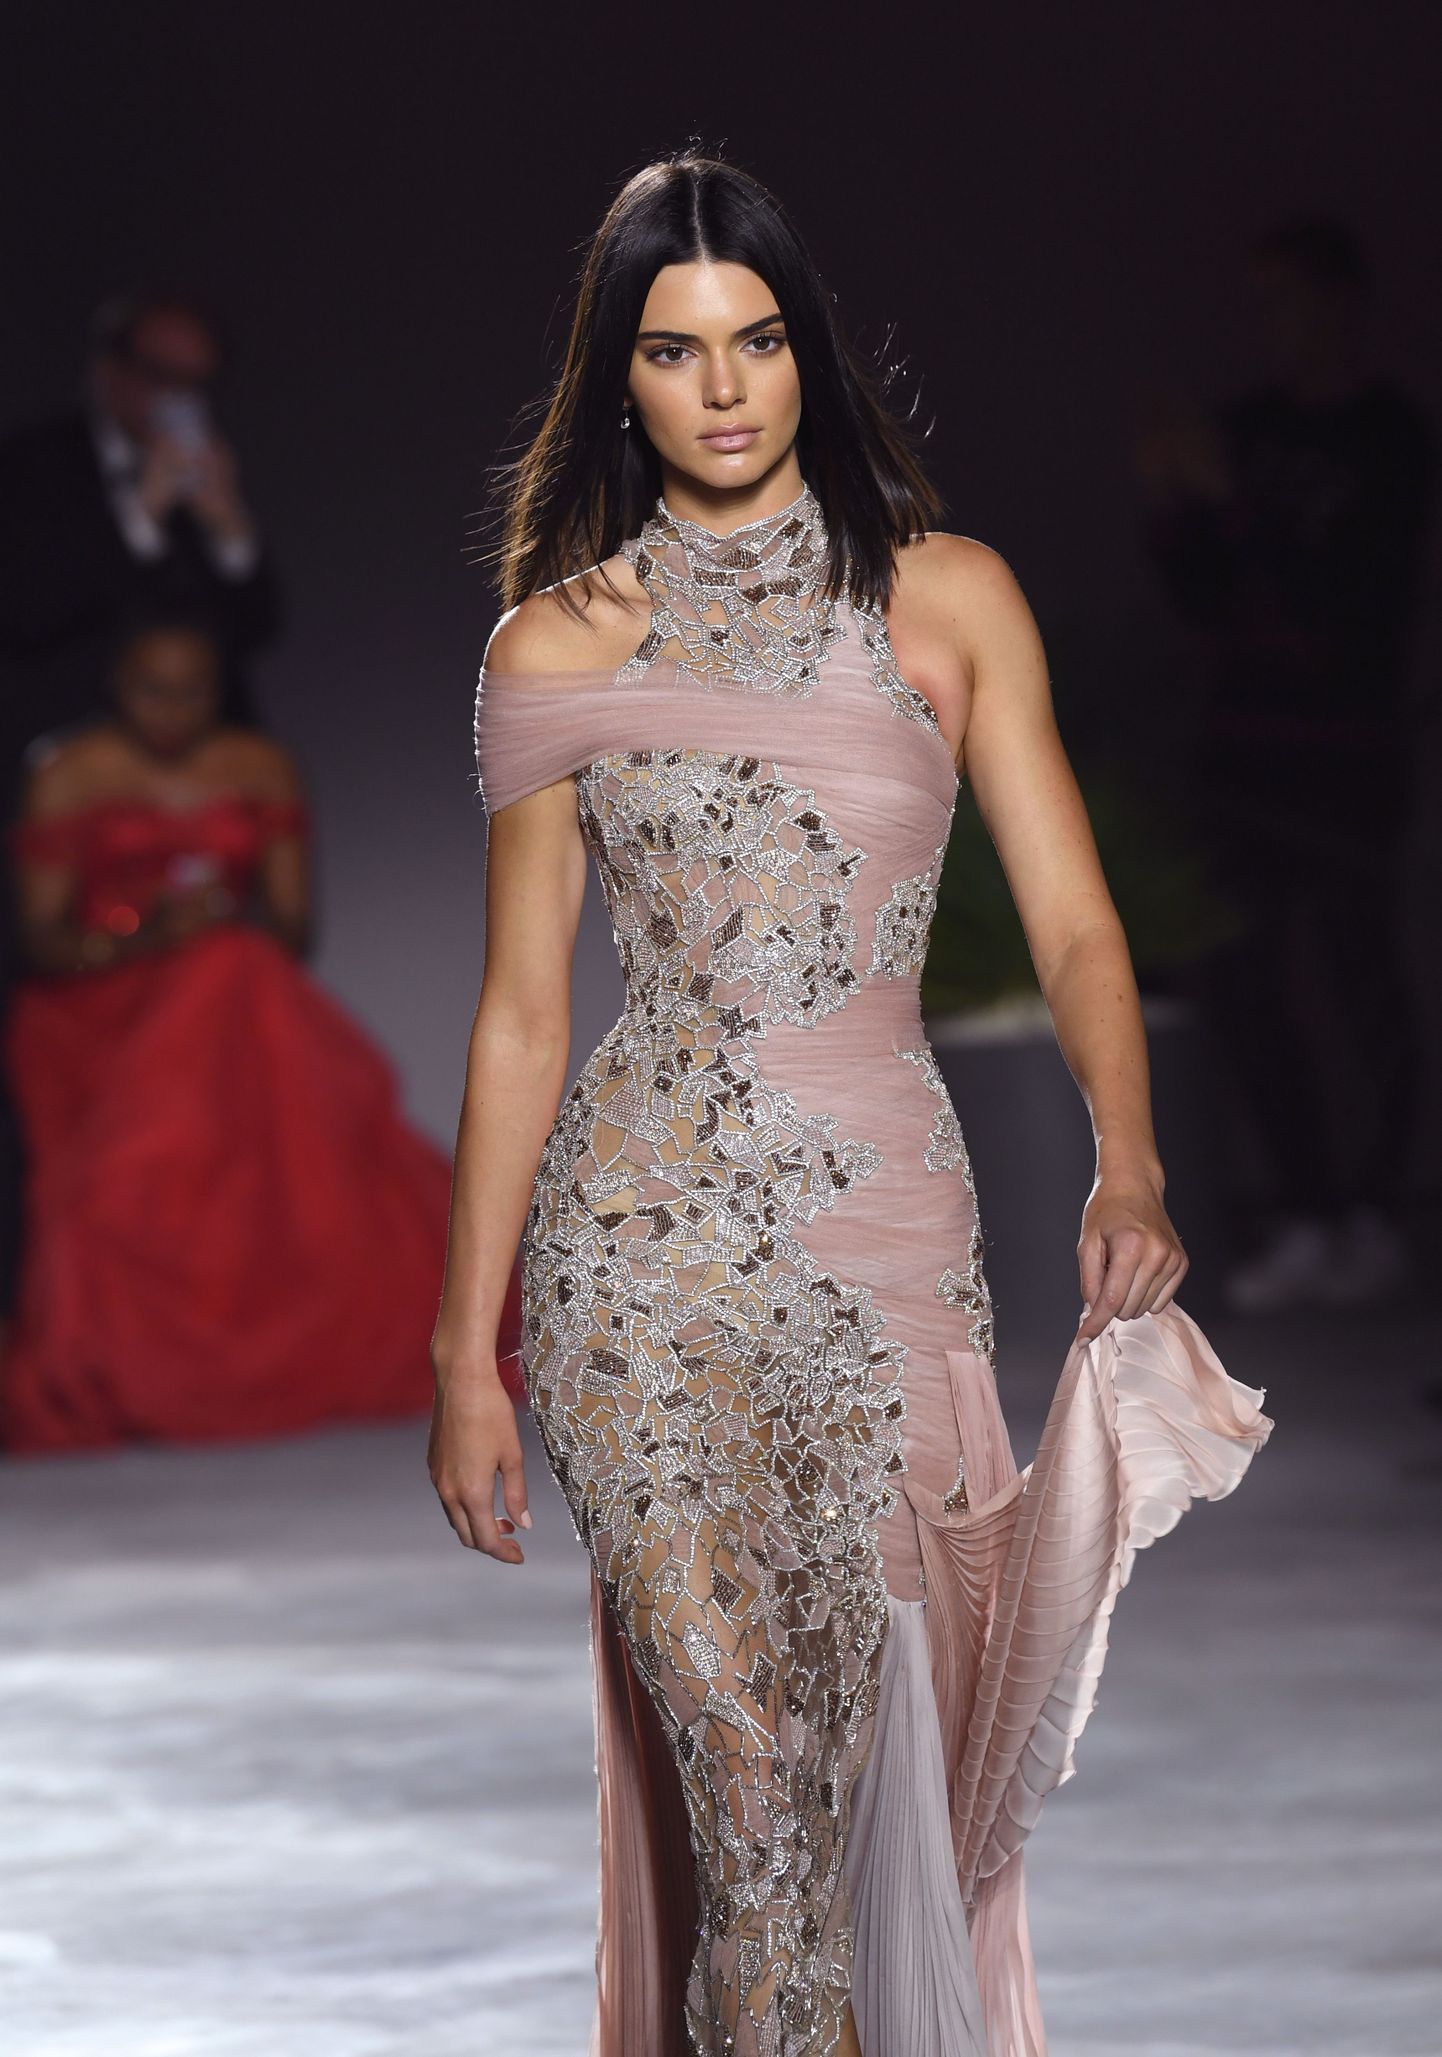 Kendall Jenner on the catwalk at the Fashion For Relief Charity Fashion Show as part of the 70th Cannes Film Festival. Photo credit should read: Doug Peters/EMPICS Entertainment